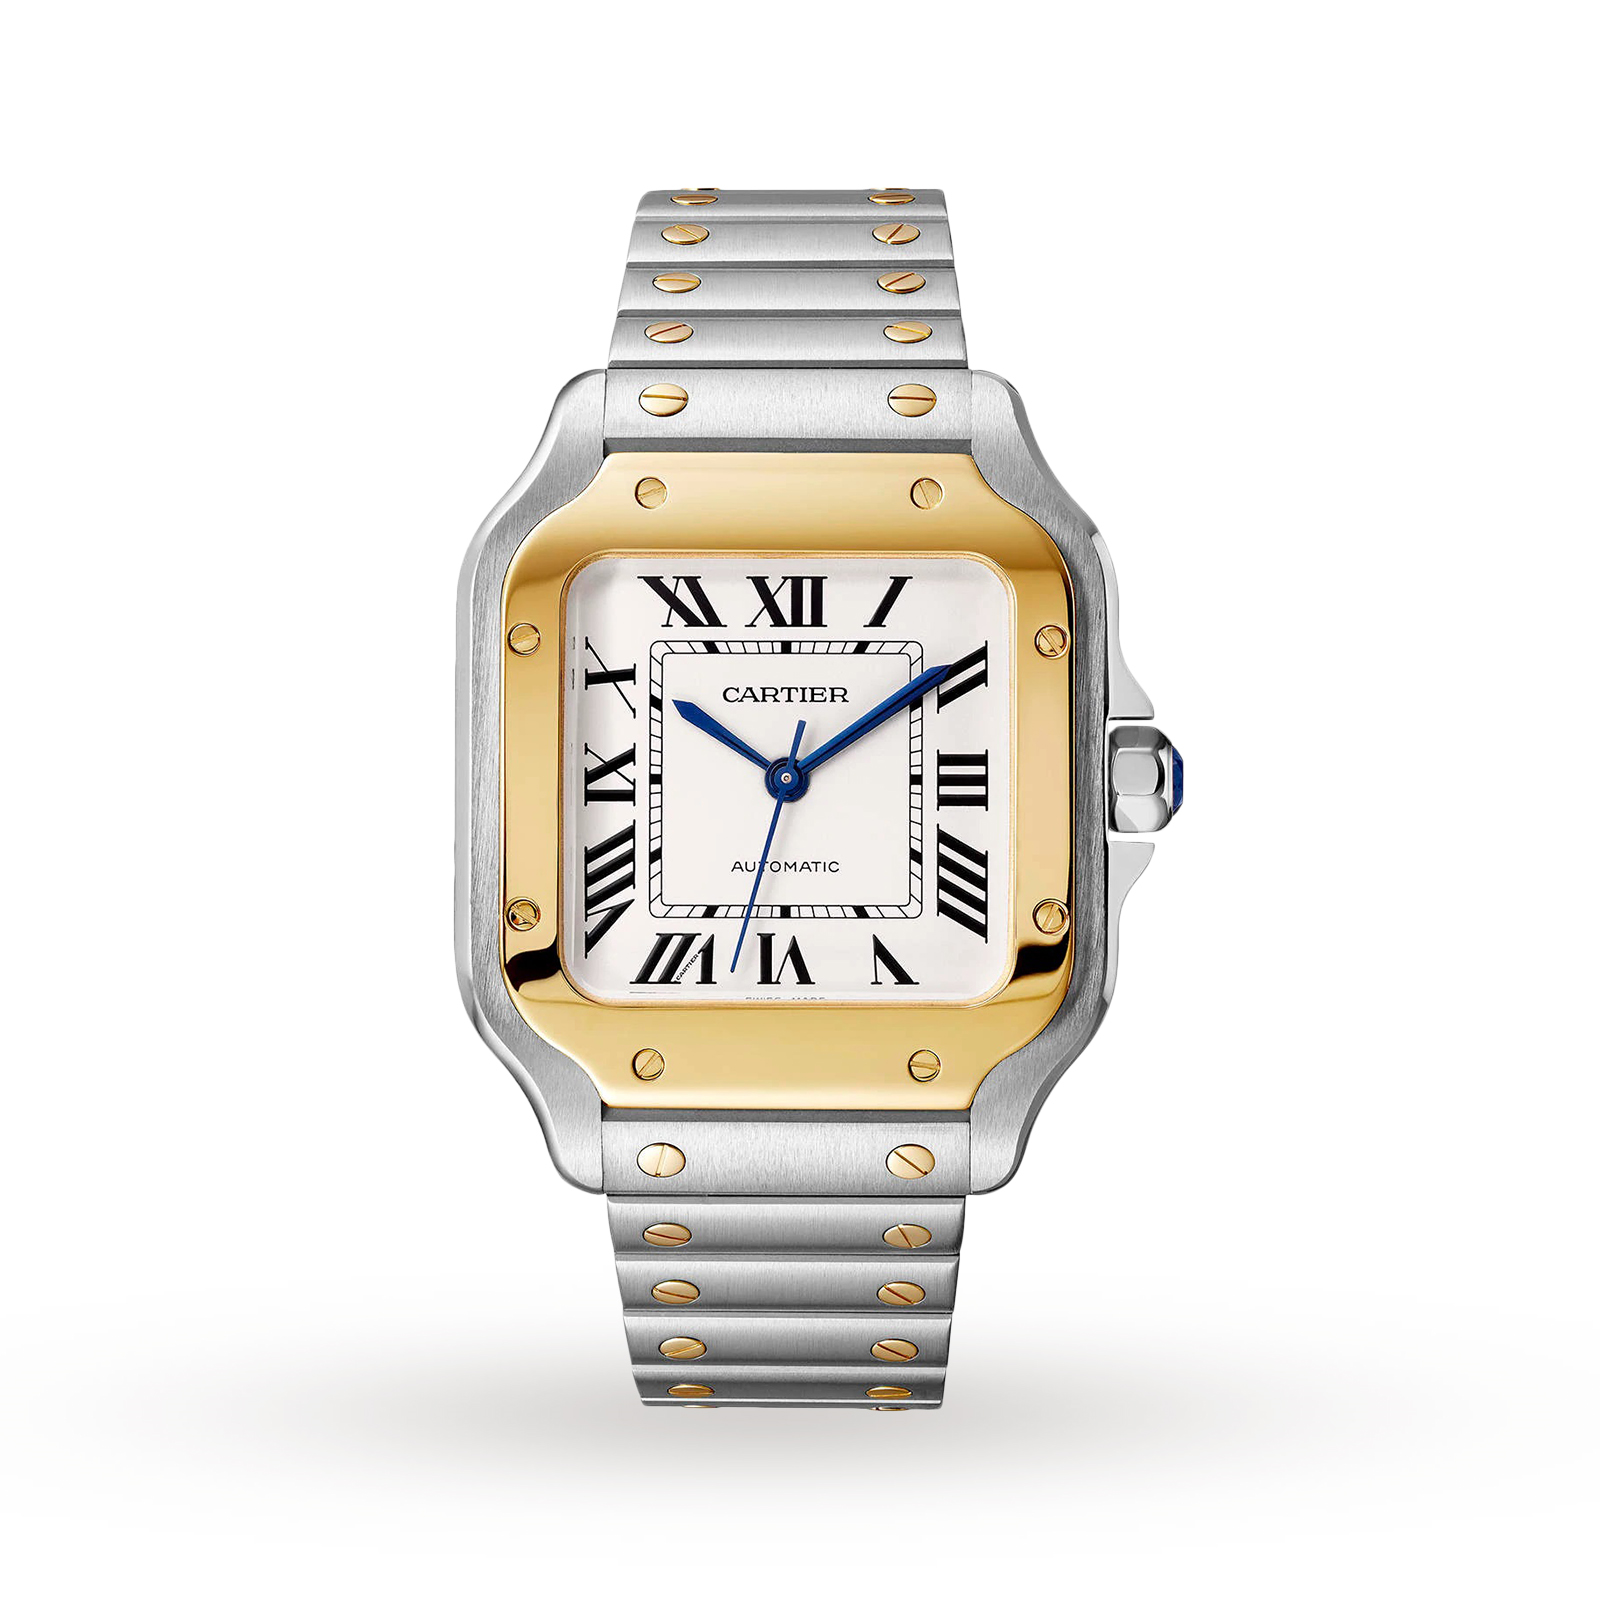 Swiss Santos de Cartier watch, Medium model, automatic, yellow gold and steel, interchangeable metal and leather bracelets